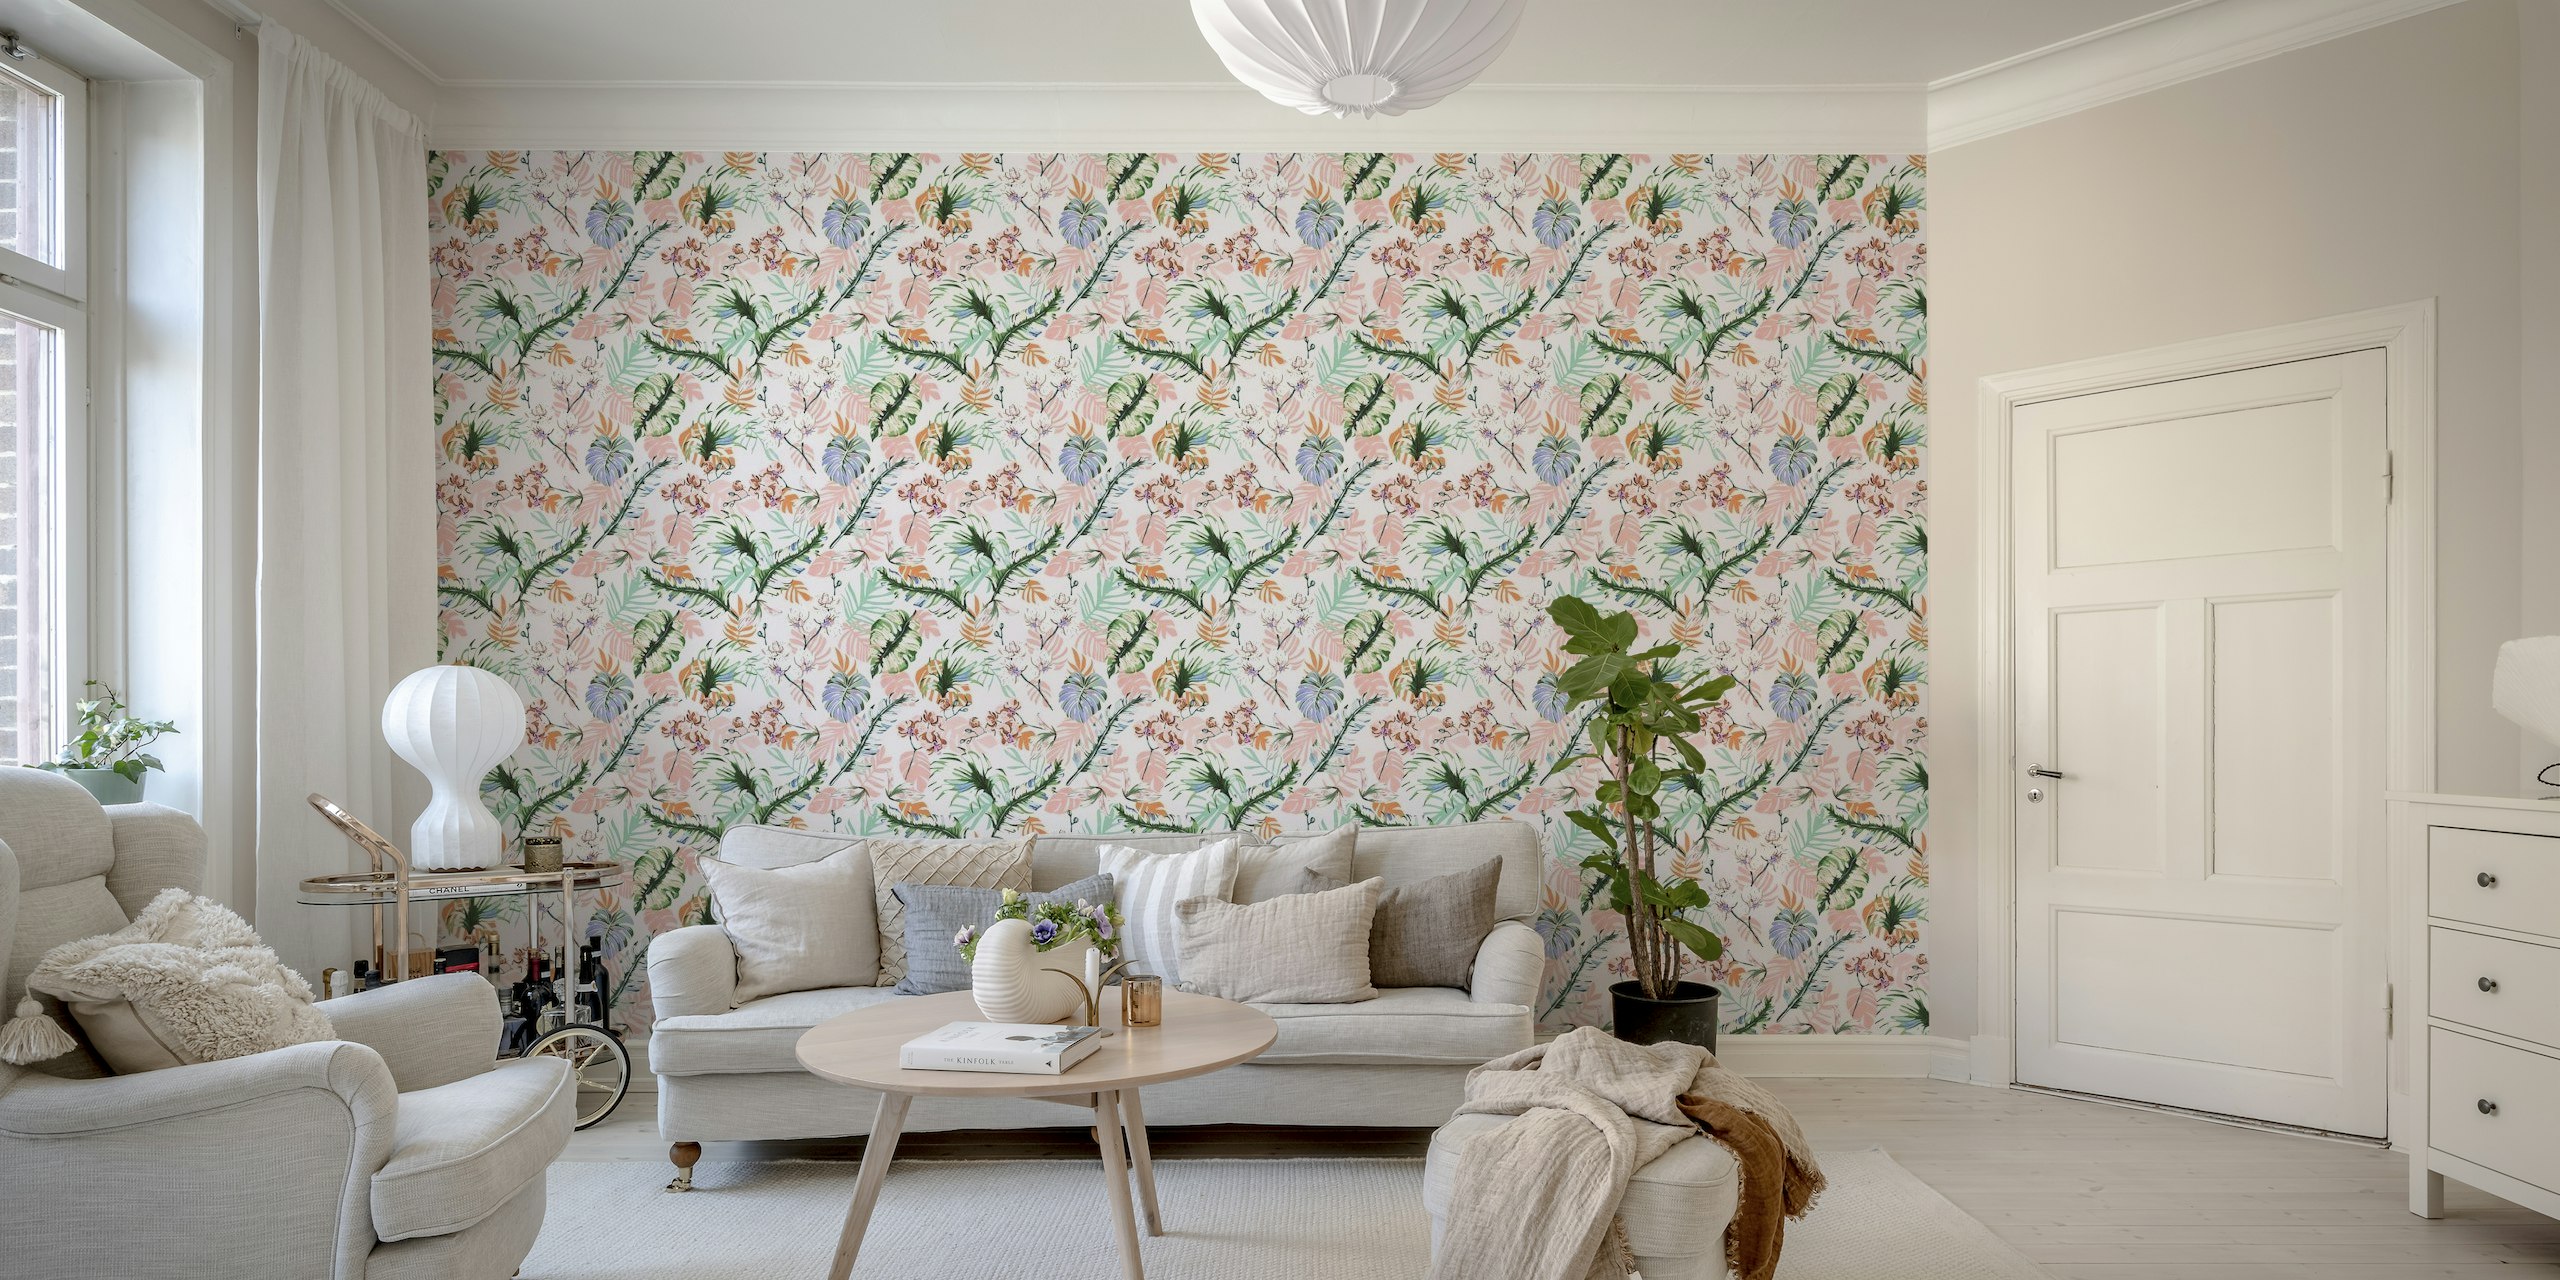 Pastel-colored jungle-themed wall mural with a variety of tropical leaves and flowers